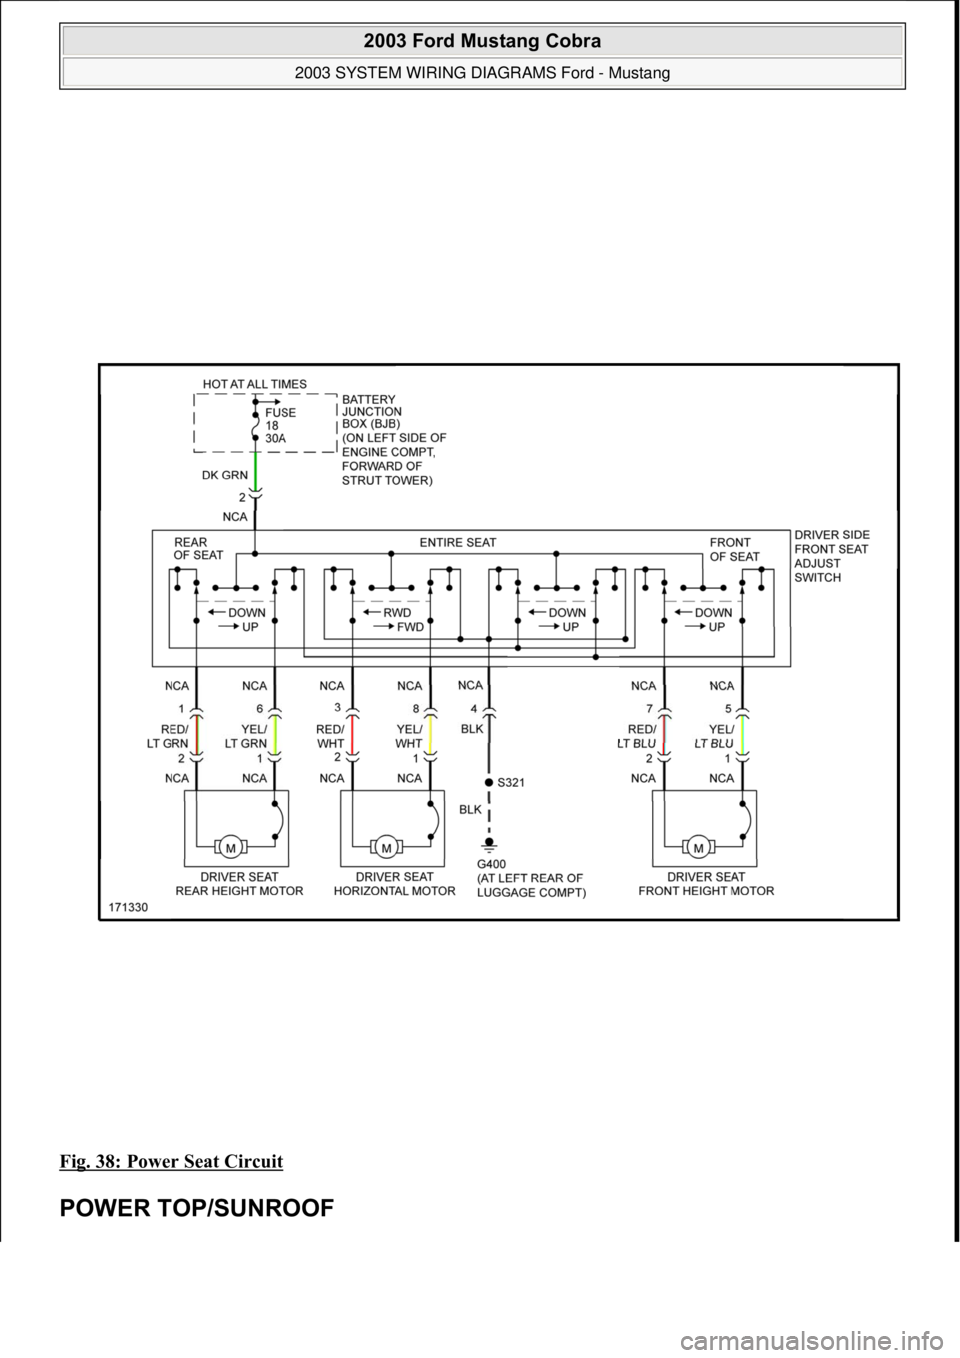 FORD MUSTANG 2003  Workshop Manual Fig. 38: Power Seat Circuit 
POWER TOP/SUNROOF 
 
2003 Ford Mustang Cobra 
2003 SYSTEM WIRING DIAGRAMS Ford - Mustang  
111  
18 ноября  2011 г. 12:47:06Page 39 © 2006 Mitchell Repair Informat